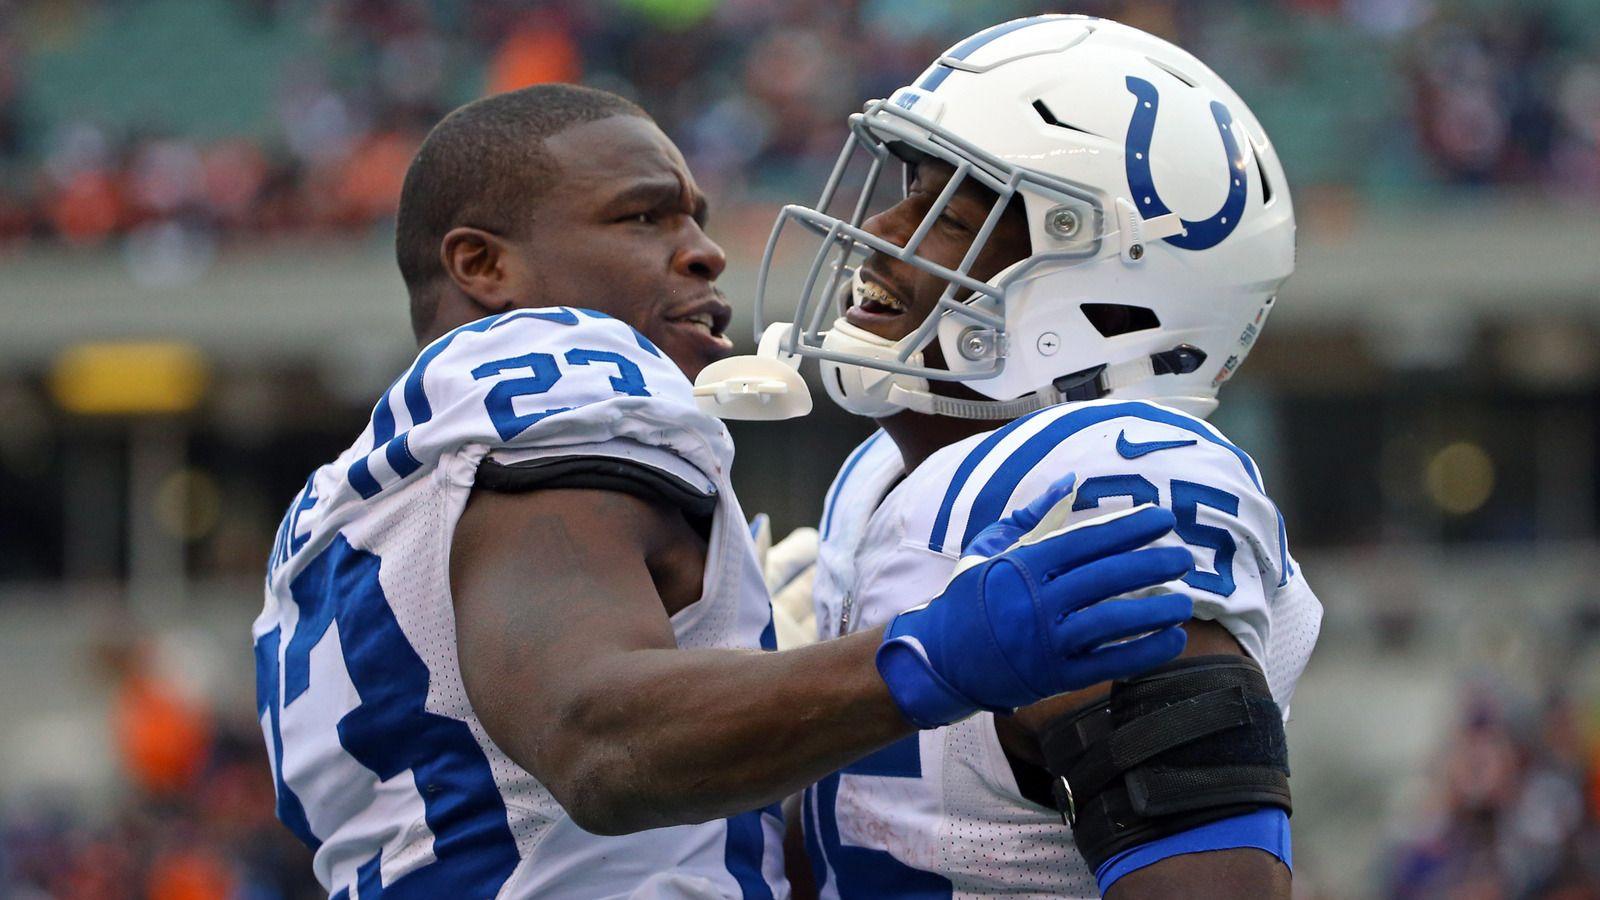 Report: Eagles talked to Colts about Frank Gore before acquiring